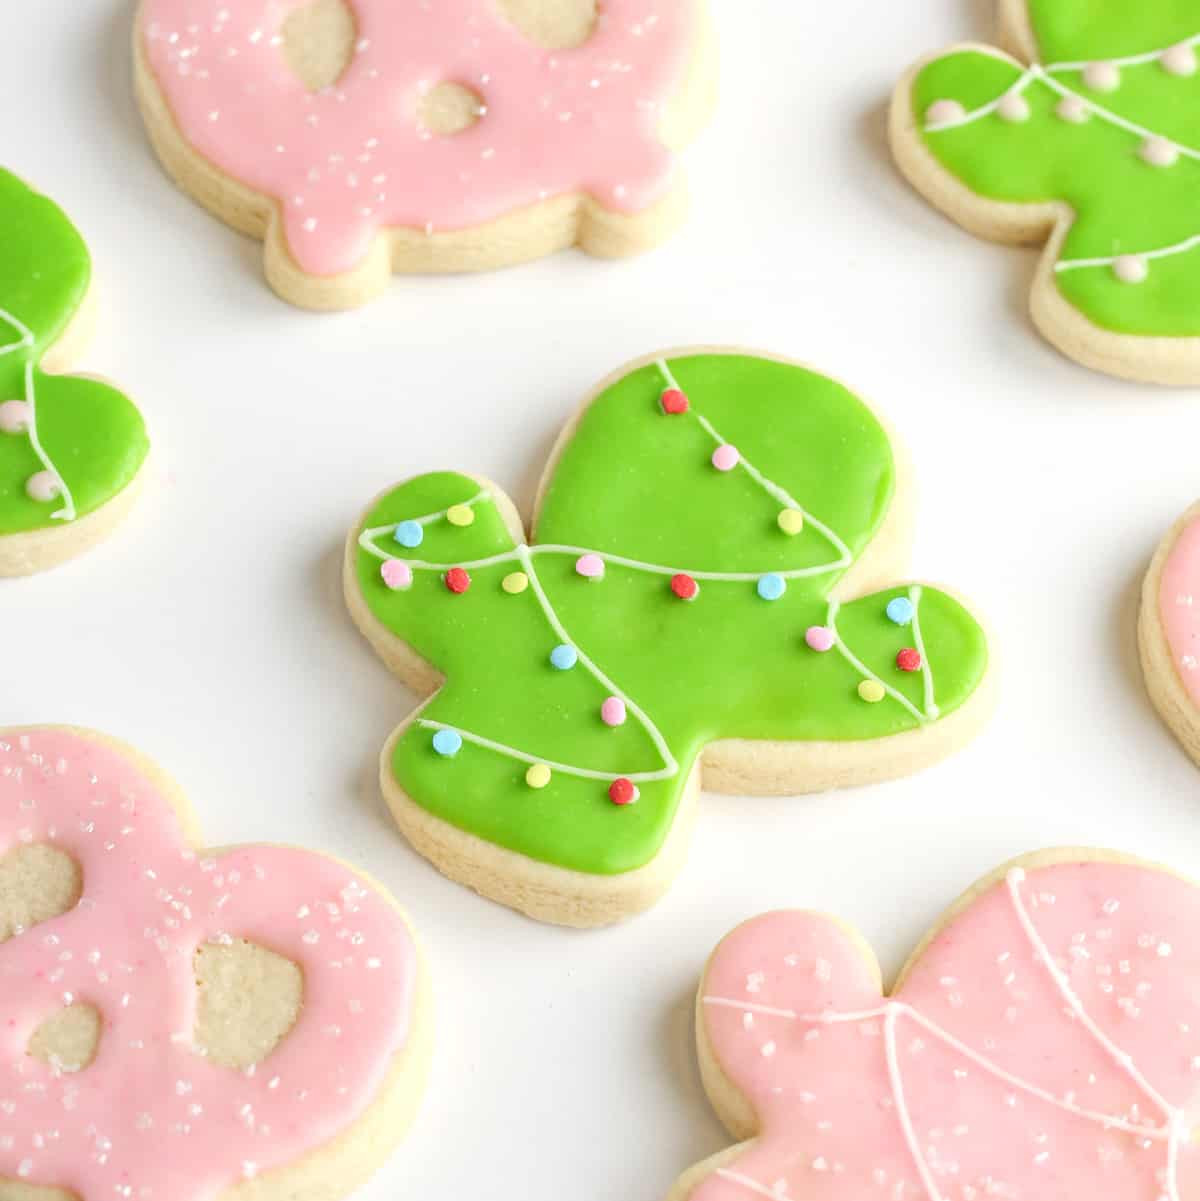 Icing Recipe For Sugar Cookies
 Easy Sugar Cookie Icing Recipe Without Eggs